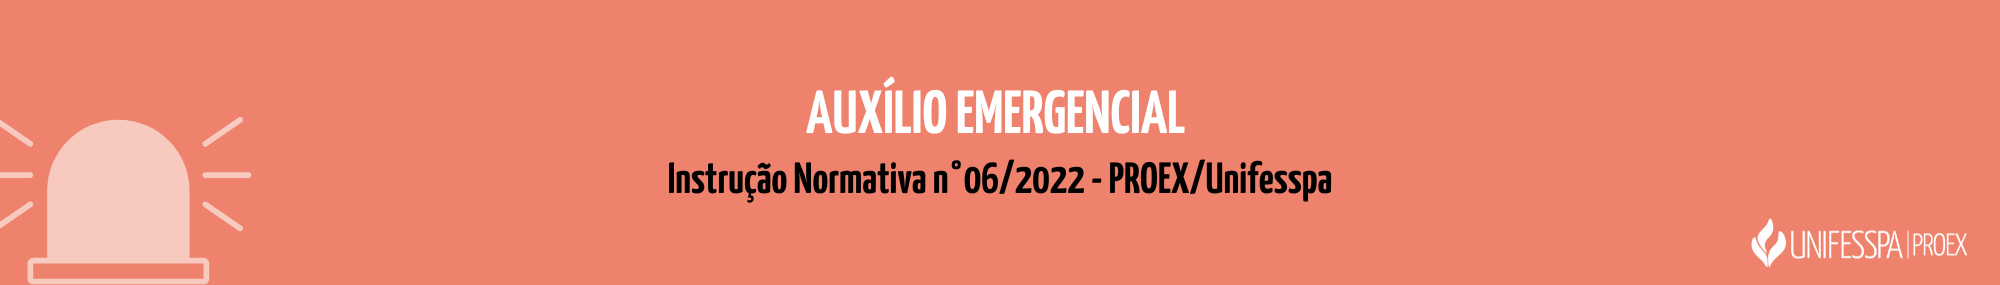 auxilio_emergencial_email.png